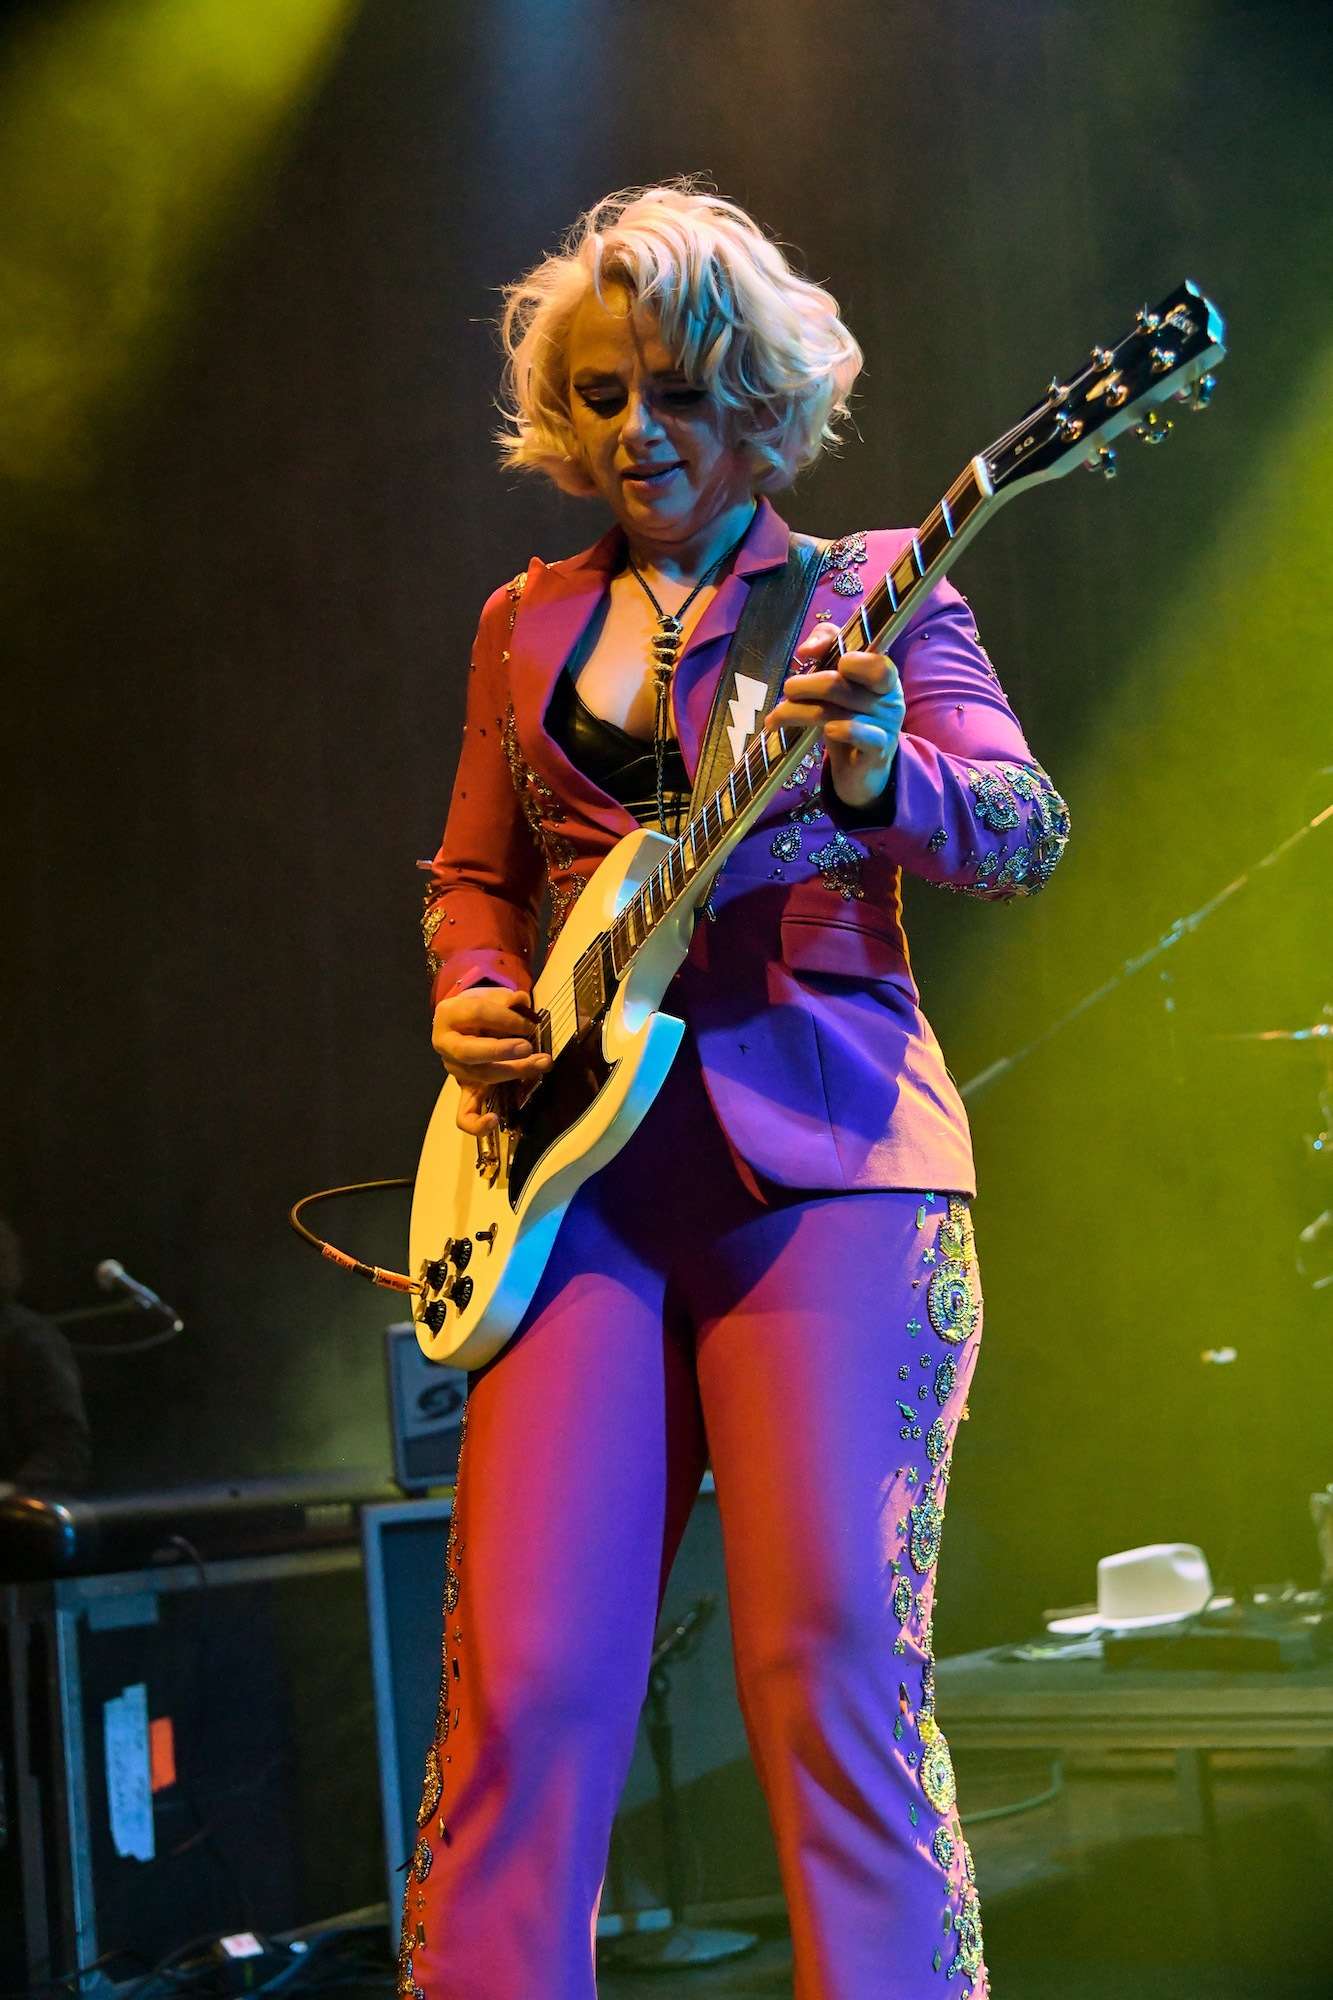 Samantha Fish Live at Park West [GALLERY] 6